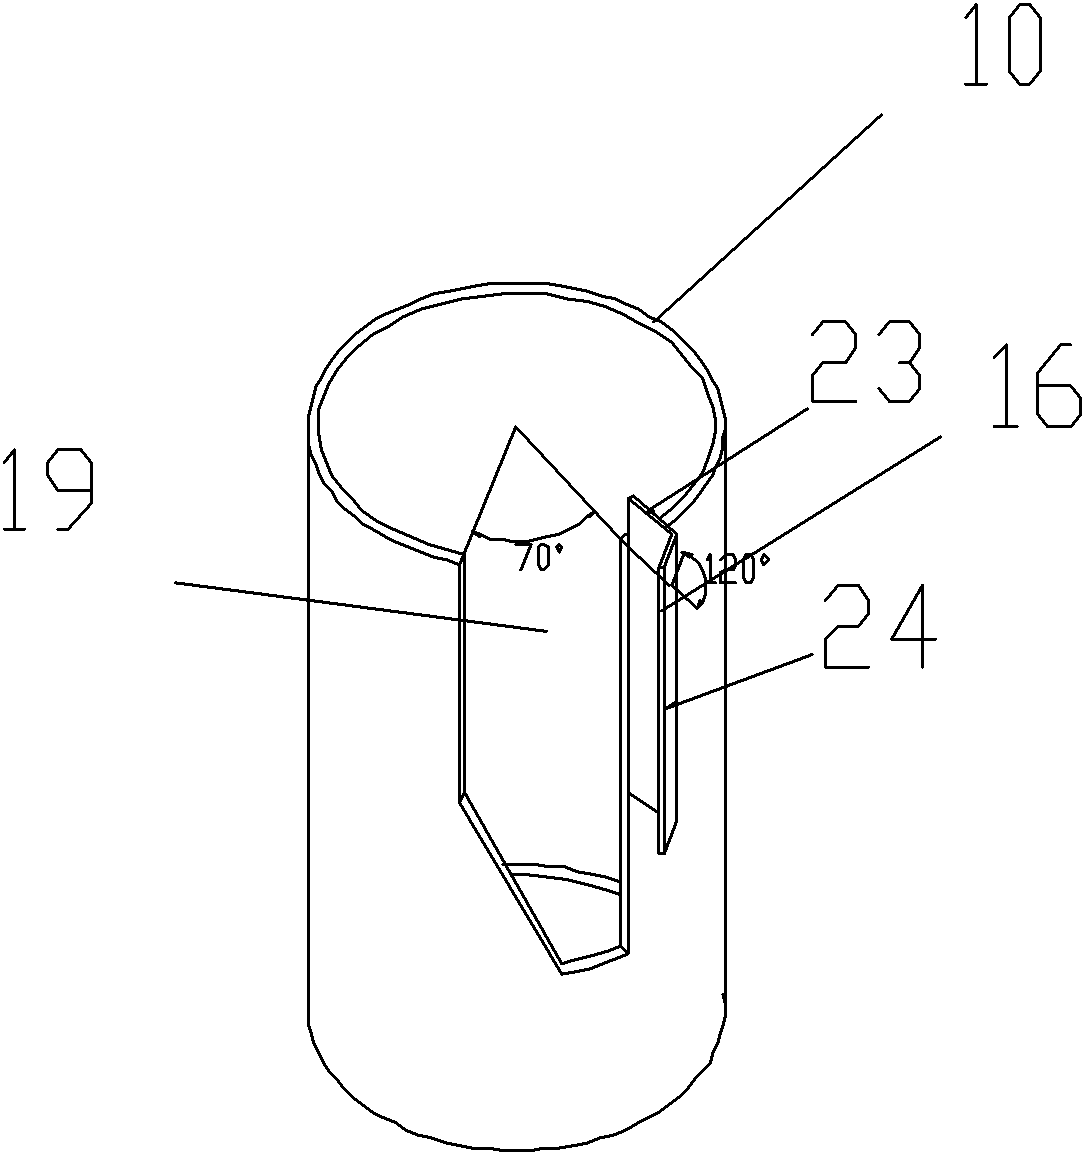 Fusing and mixing device